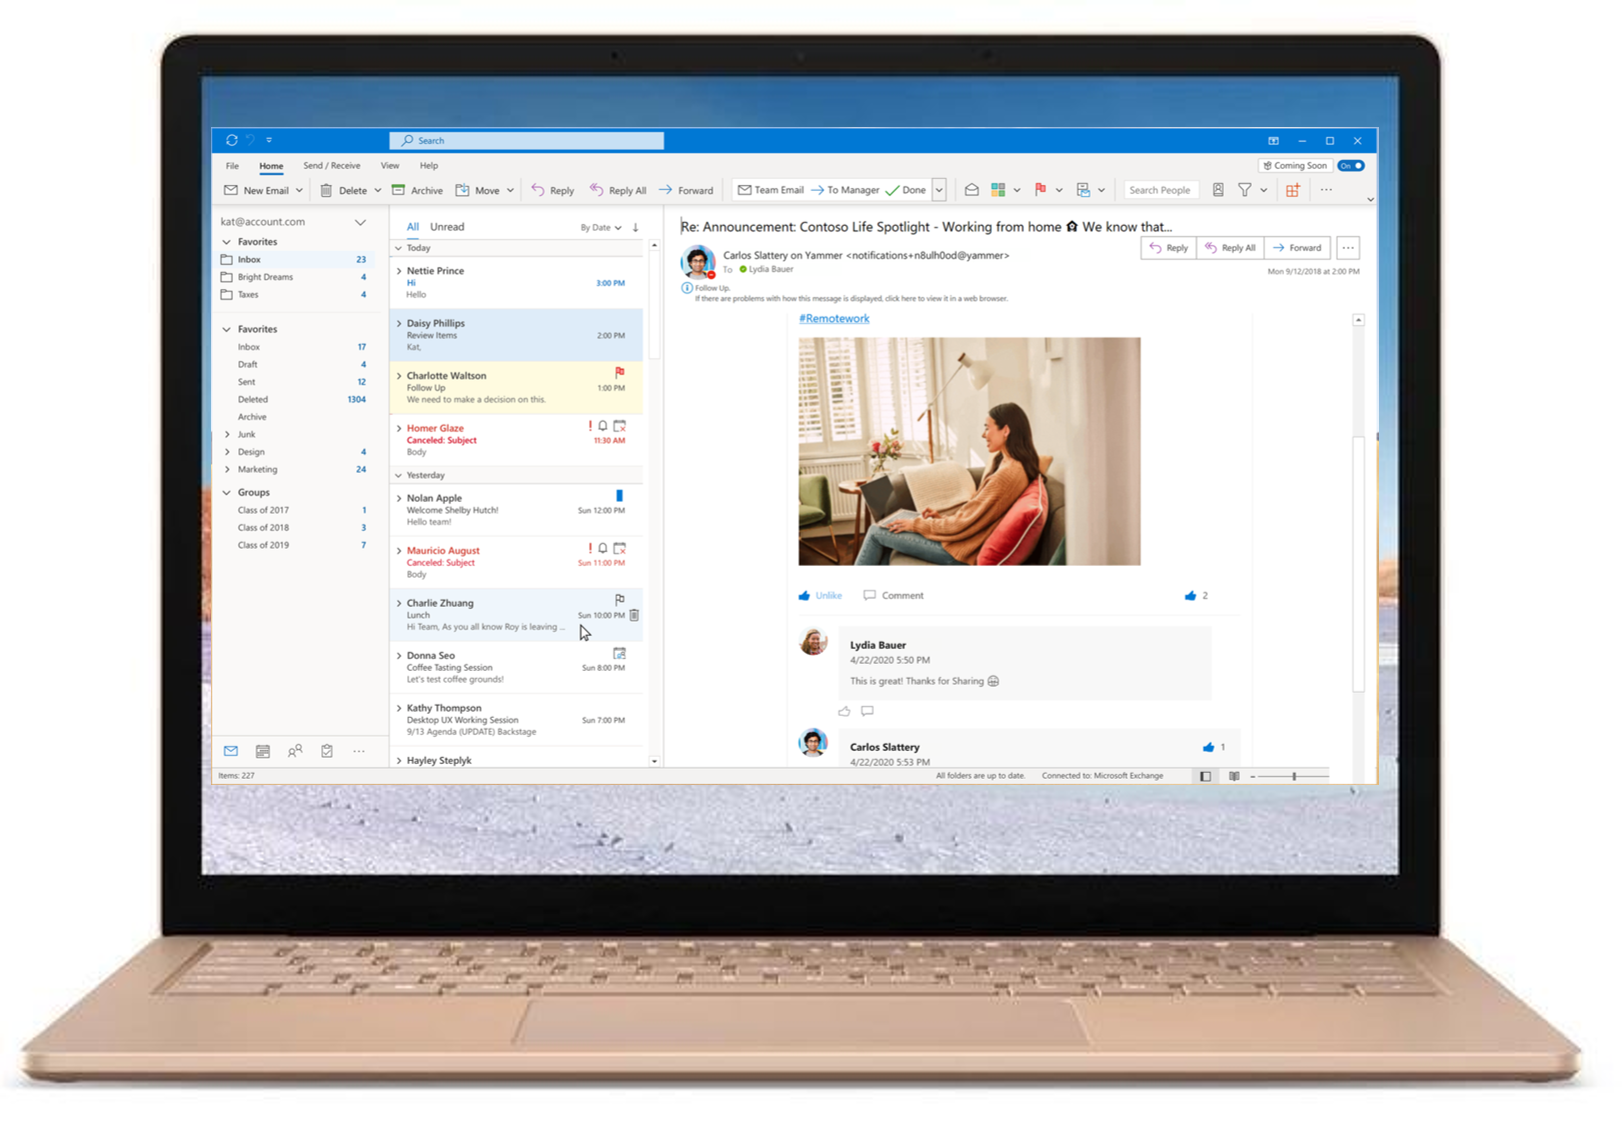 From Microsoft Teams to Fluid Framework—here’s what’s new and coming soon to Microsoft 365